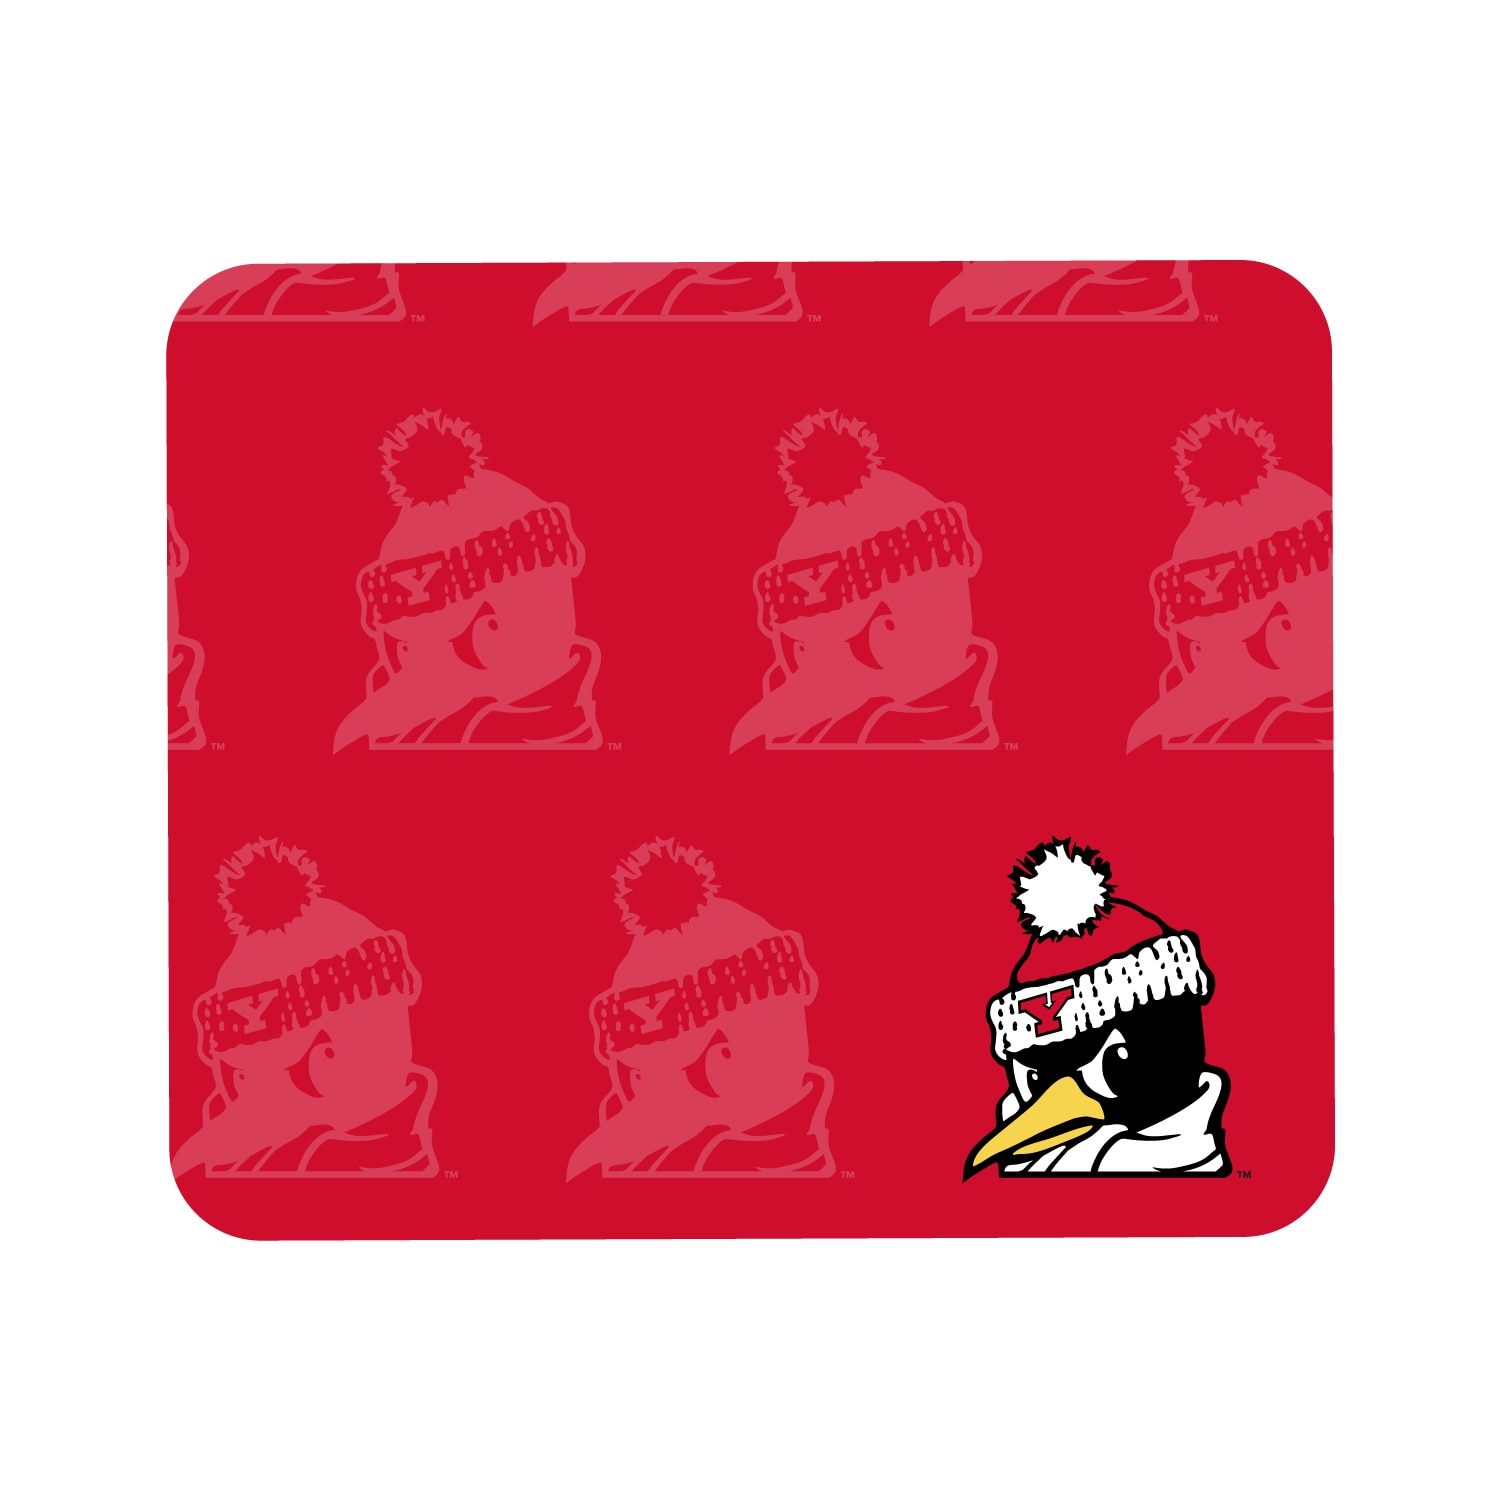 Youngstown State University Mousepad, Mascot Repeat V1